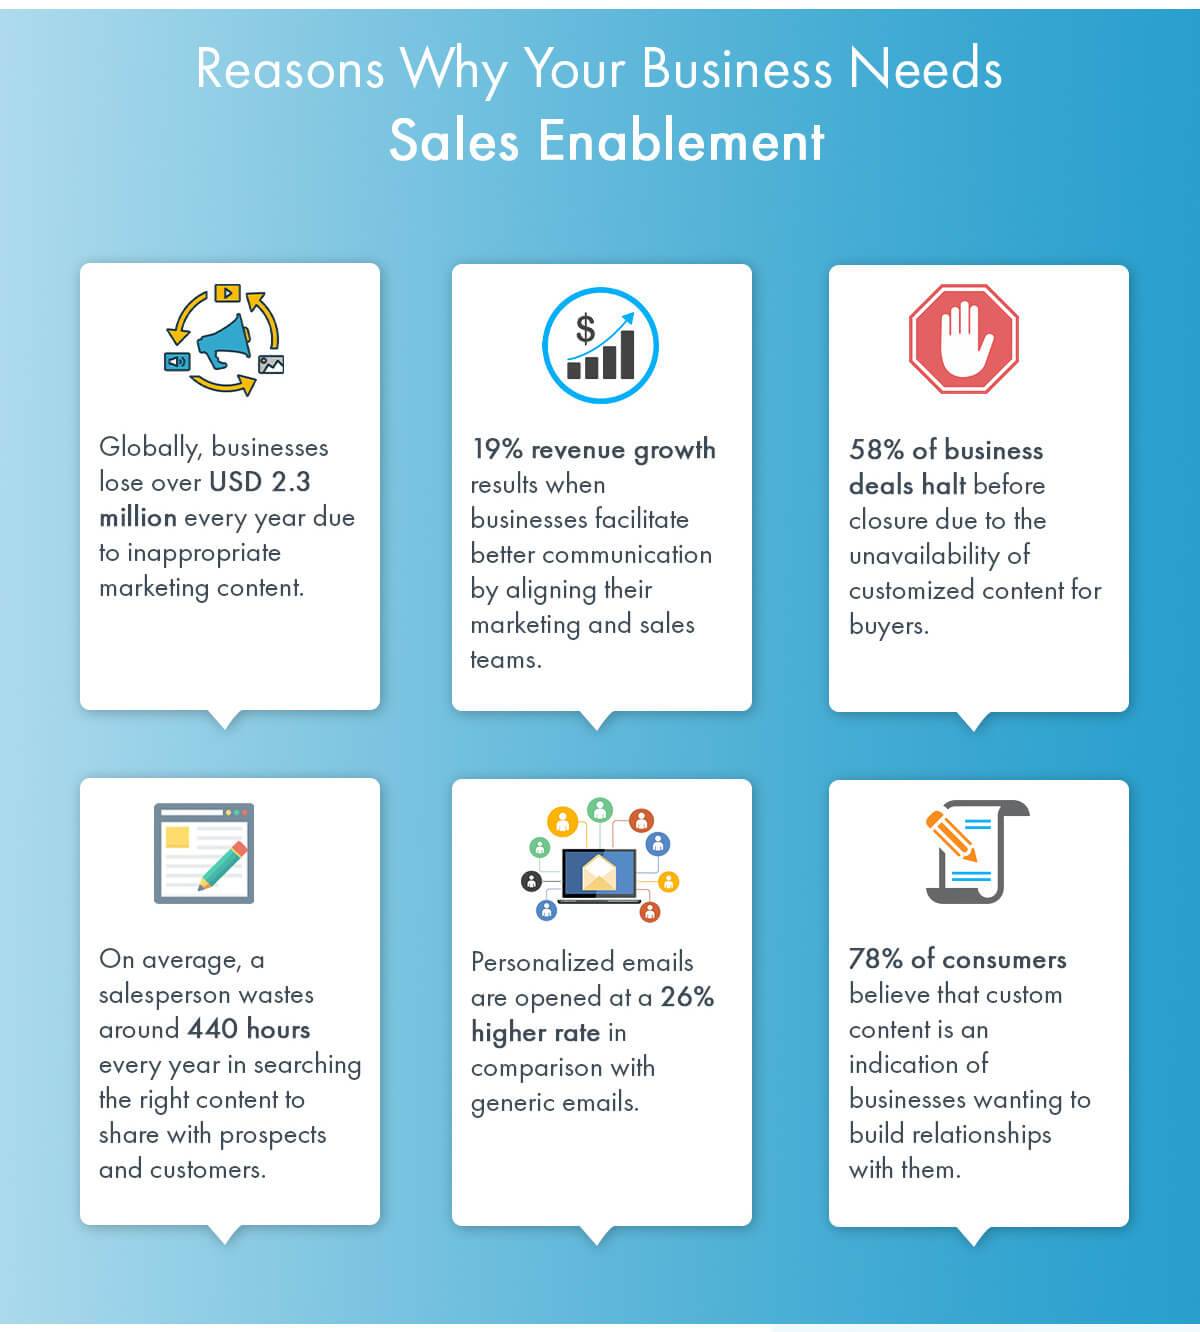 3. Creating a Sales Enablement Strategy: Step-by-Step Guide